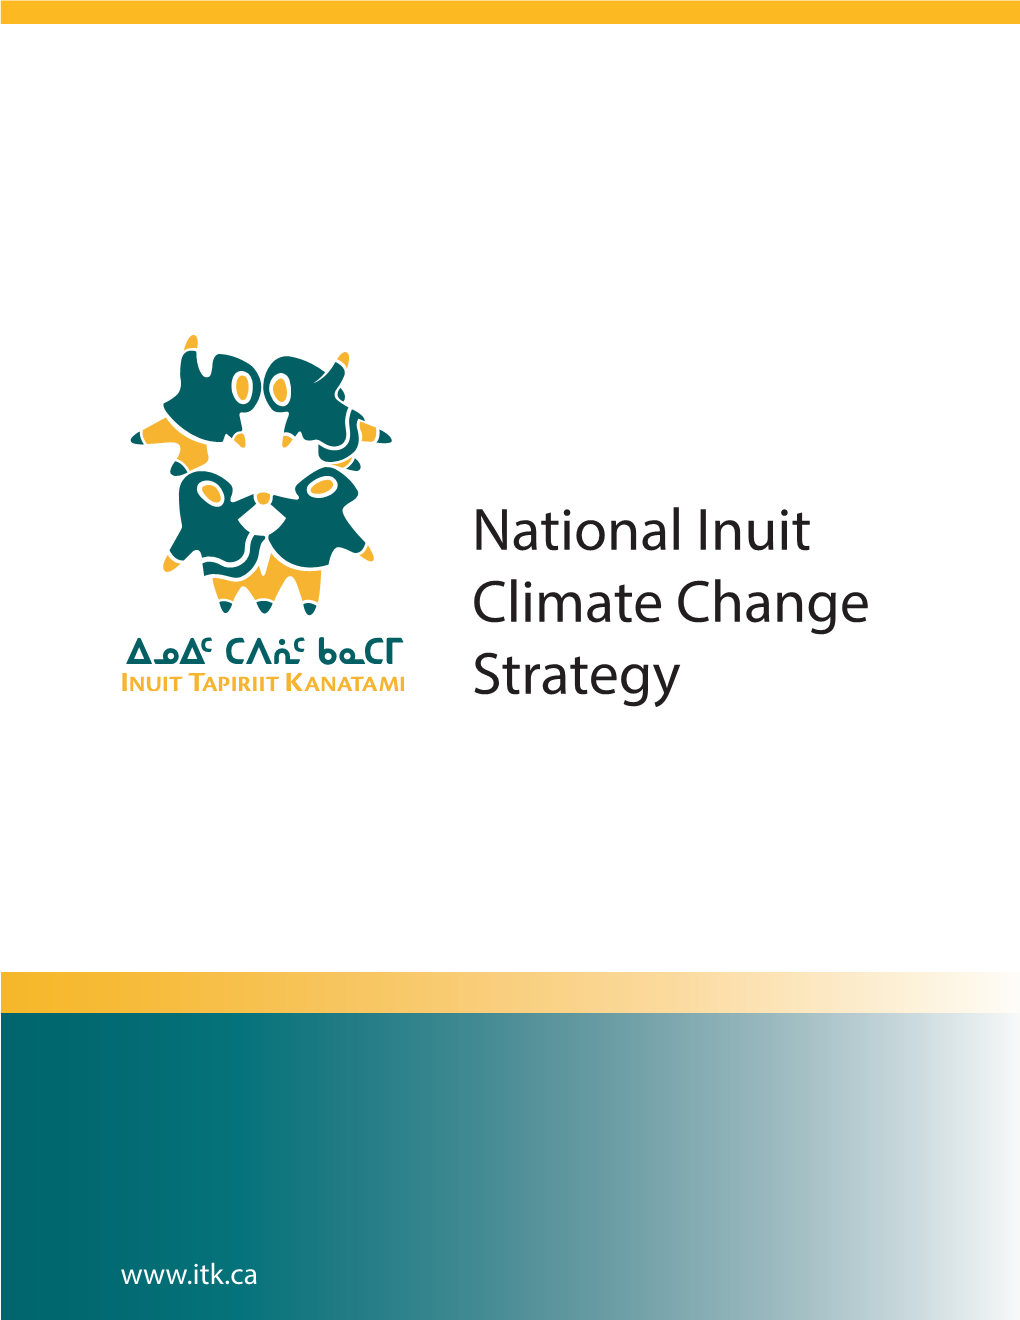 National Inuit Climate Change Strategy